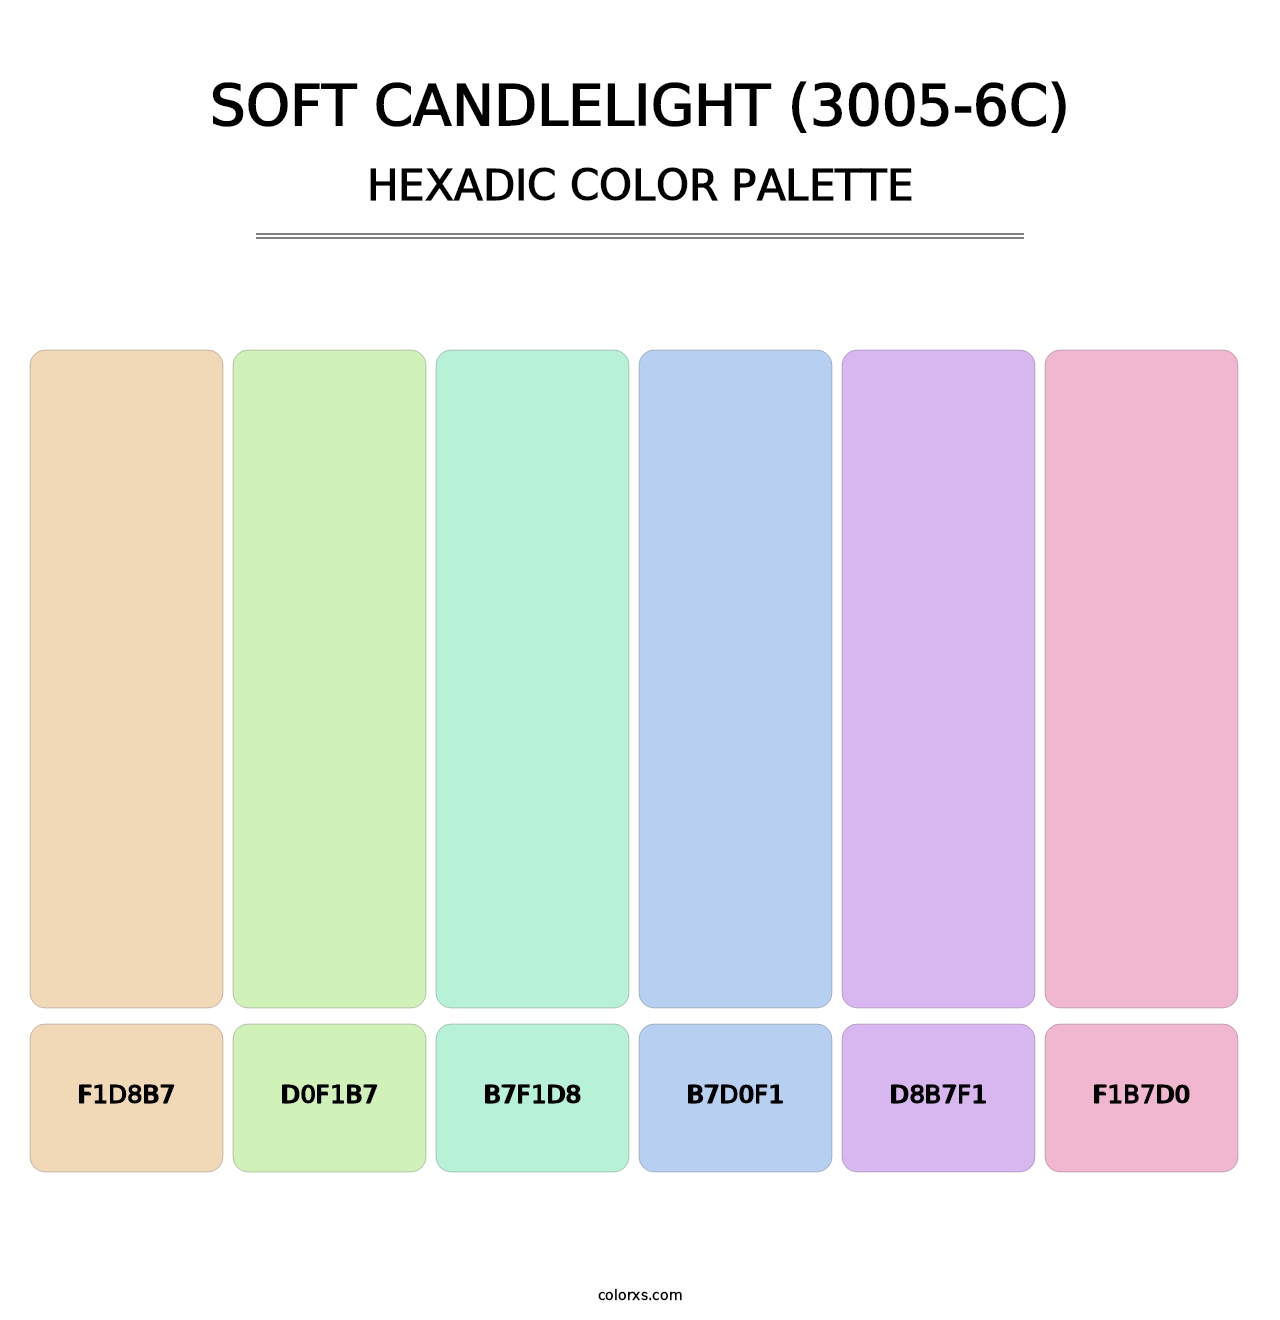 Soft Candlelight (3005-6C) - Hexadic Color Palette